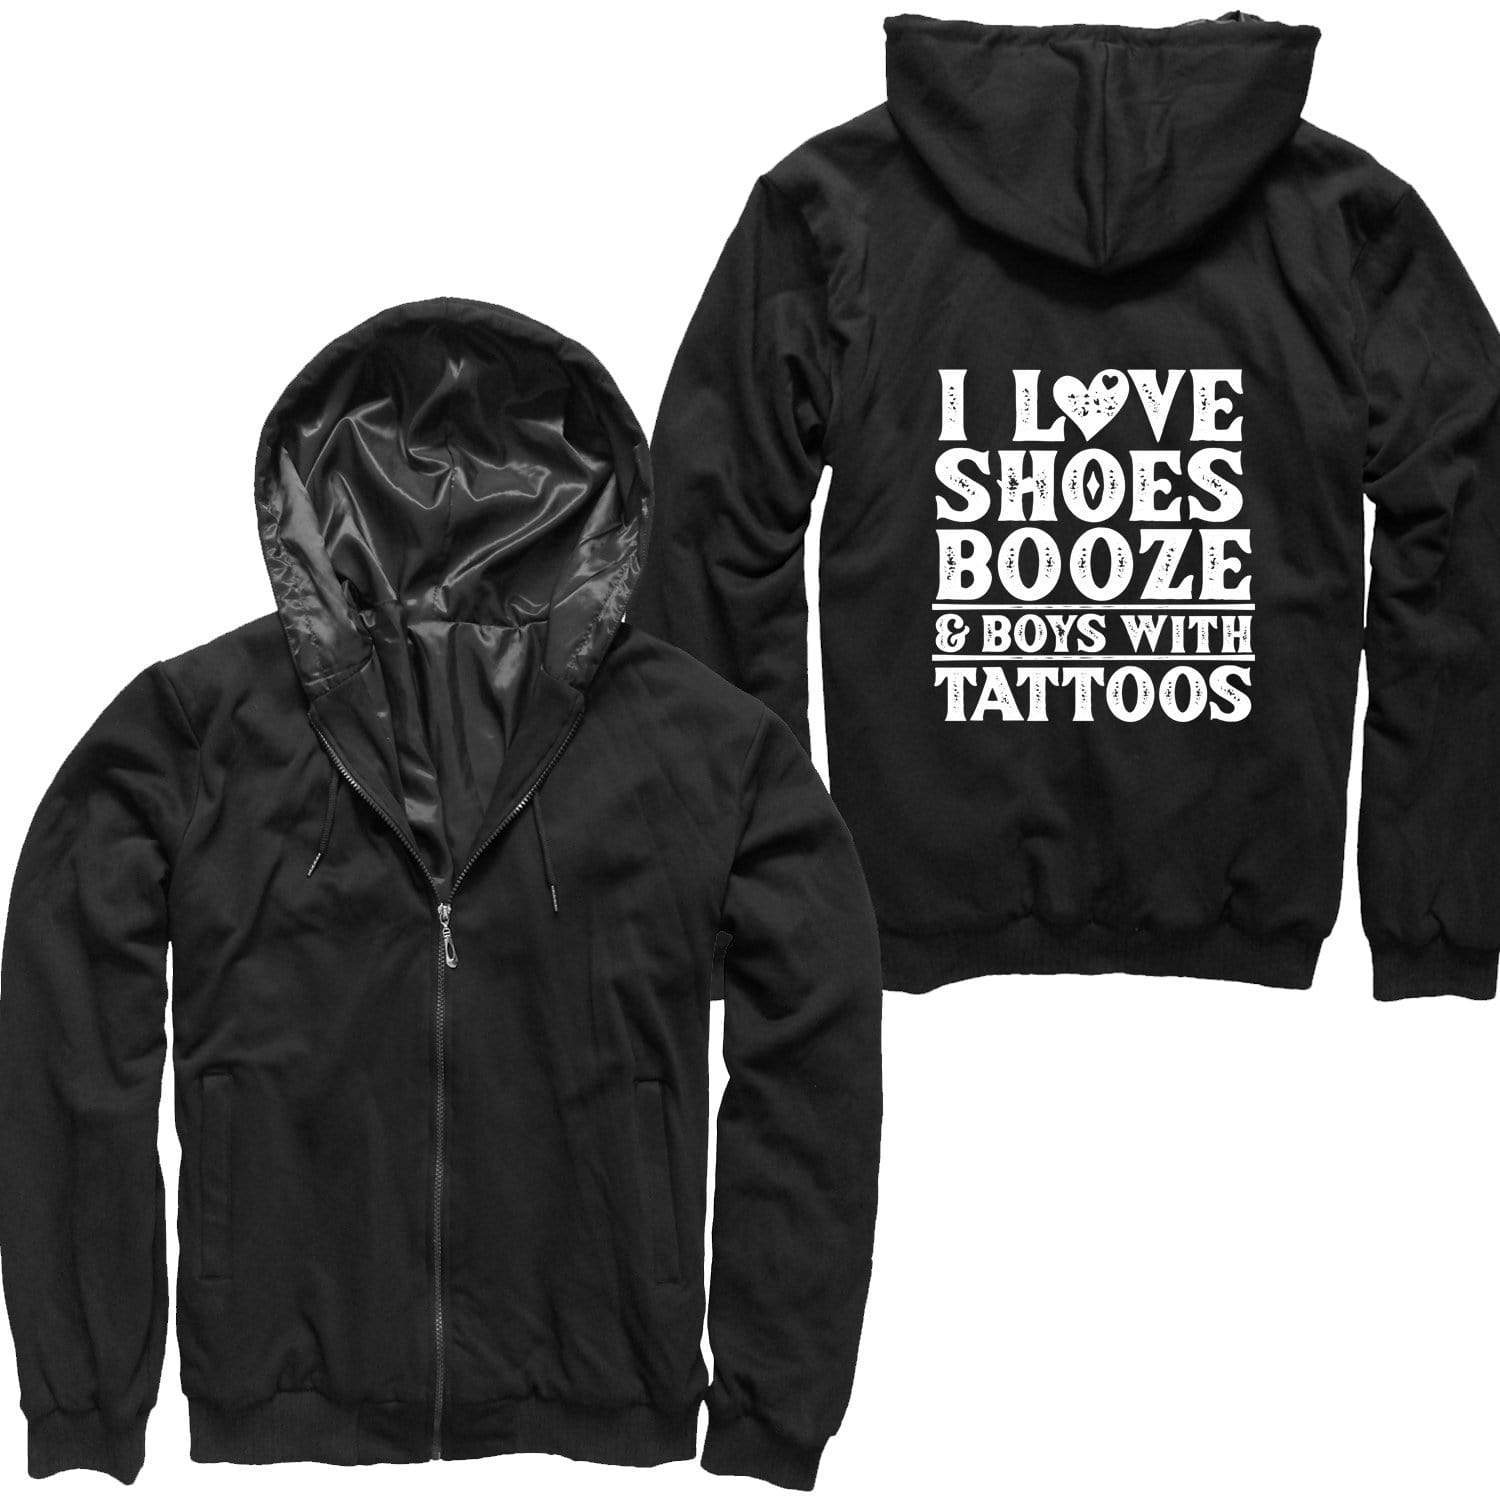 Shoes Booze Boys With Tattoos Spring Jacket - The Gear Stand